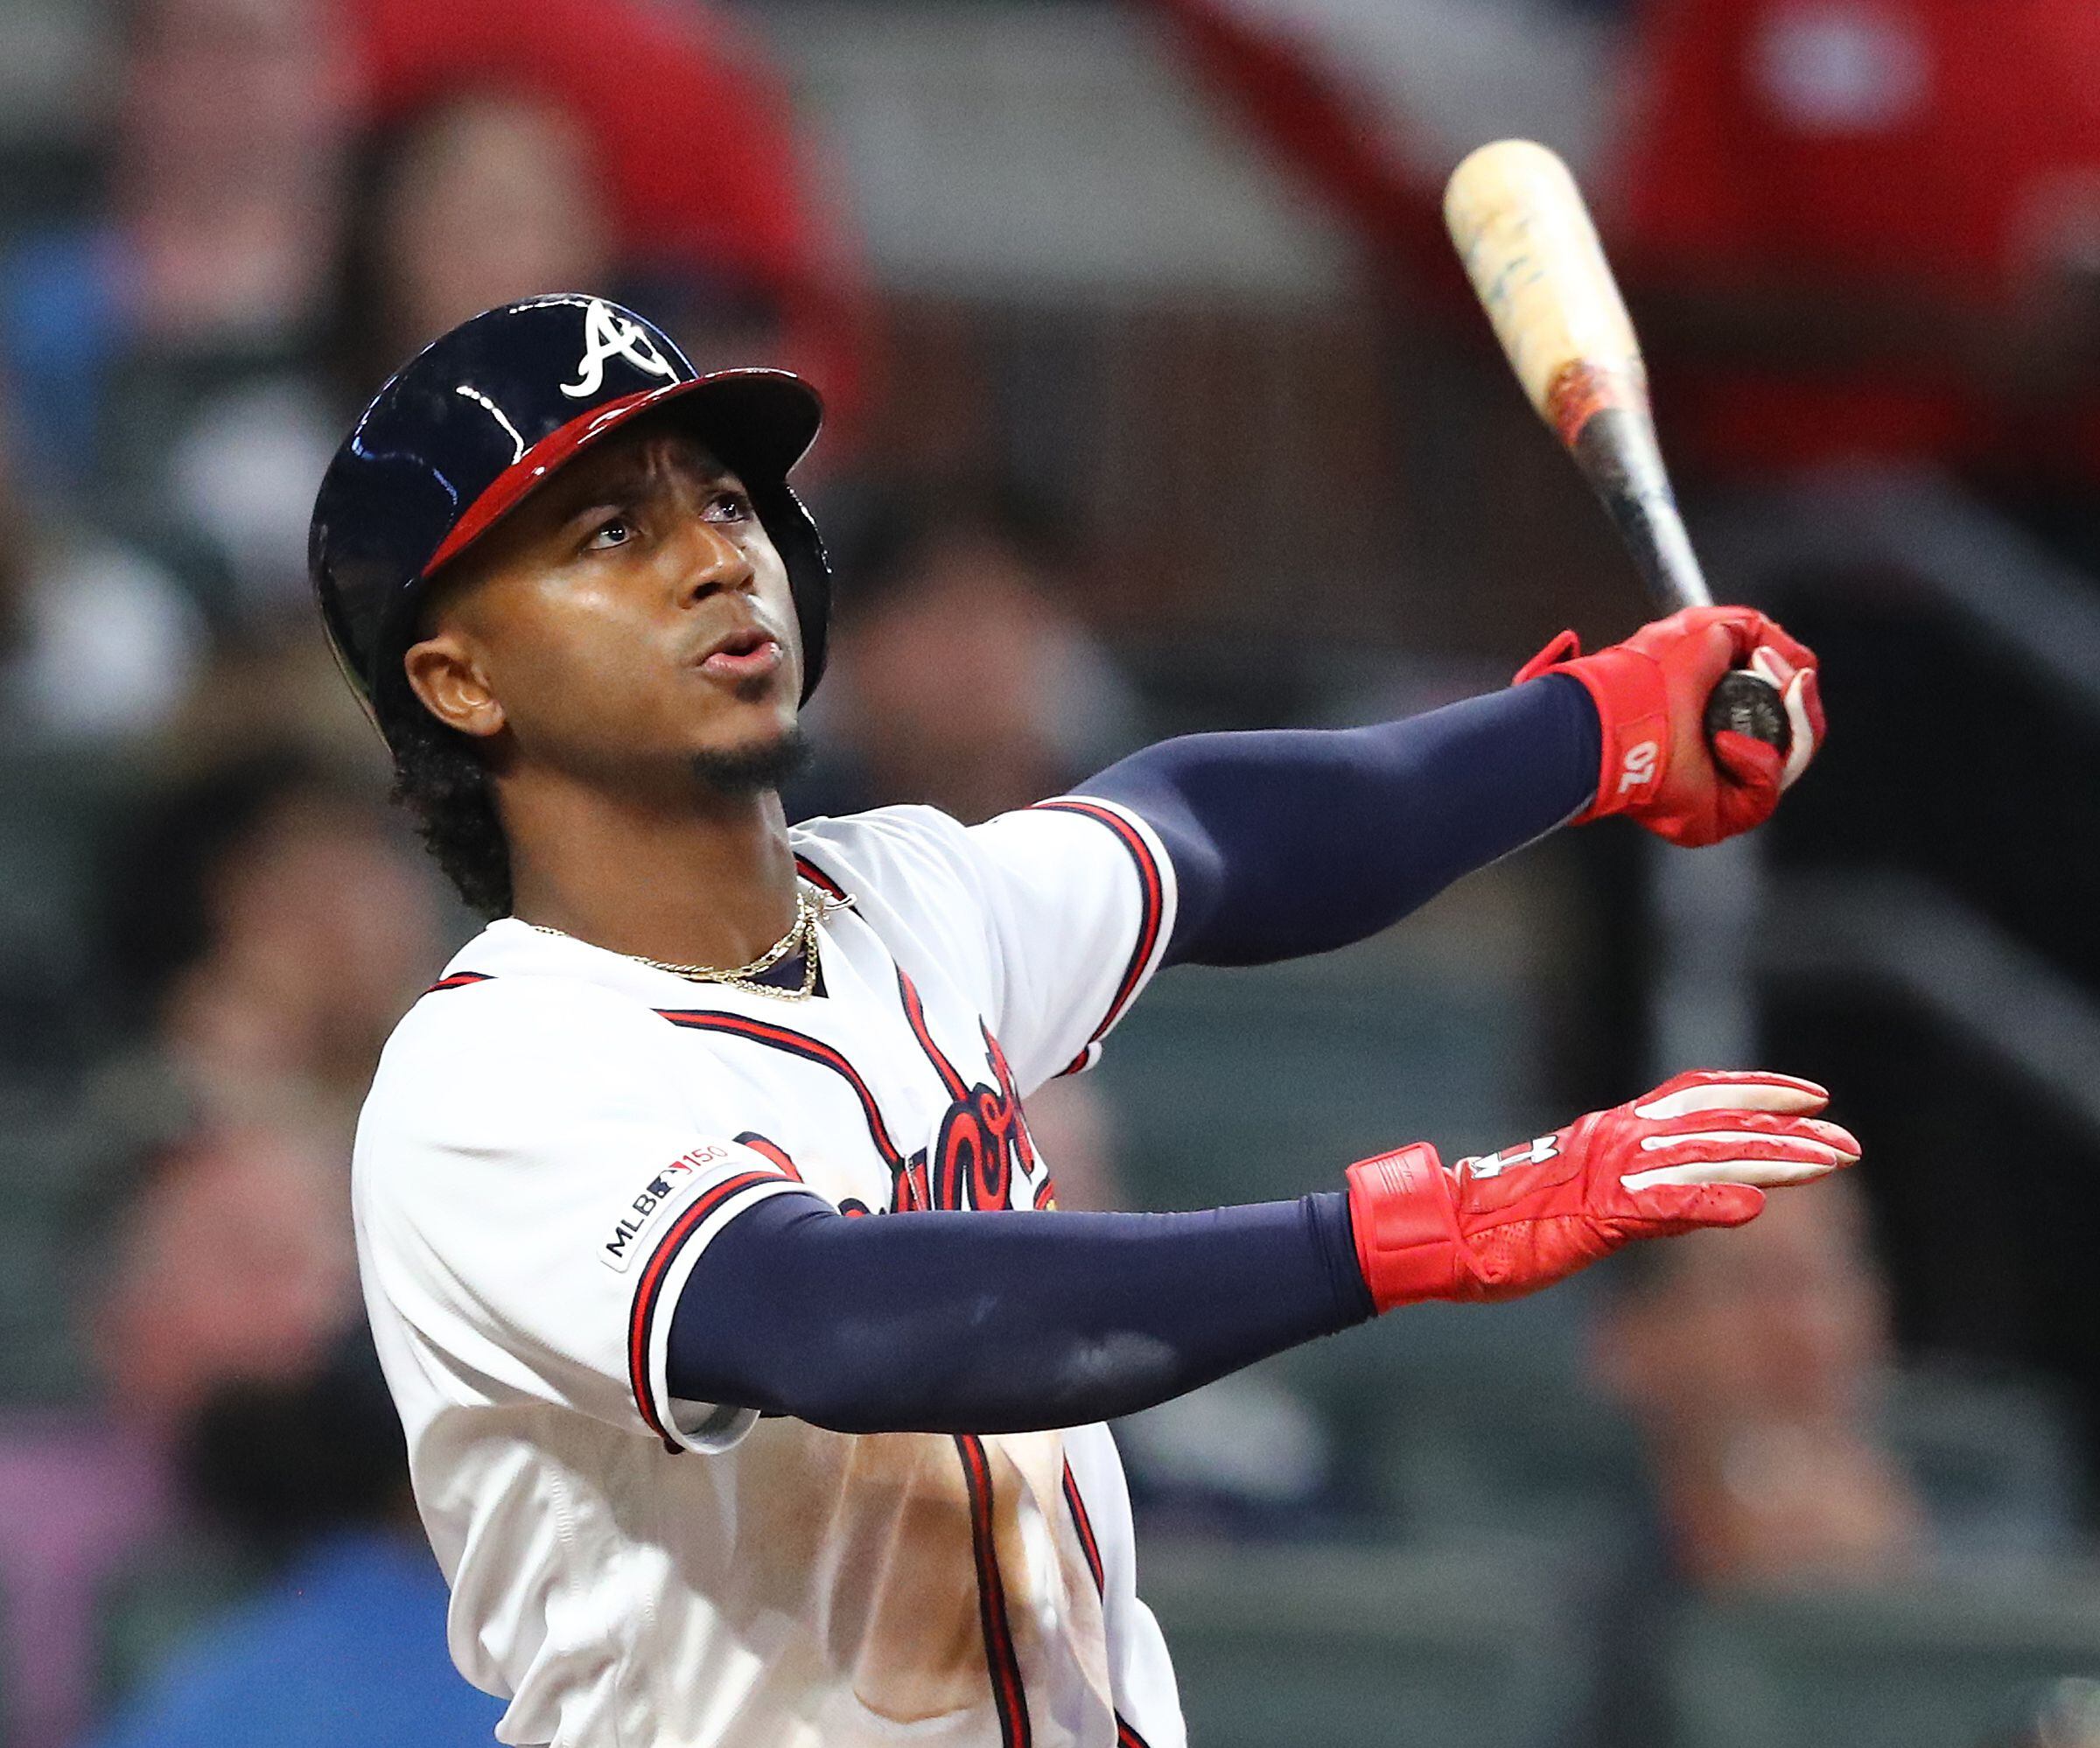 Ozzie Albies press conference announcing 7-year contract extension